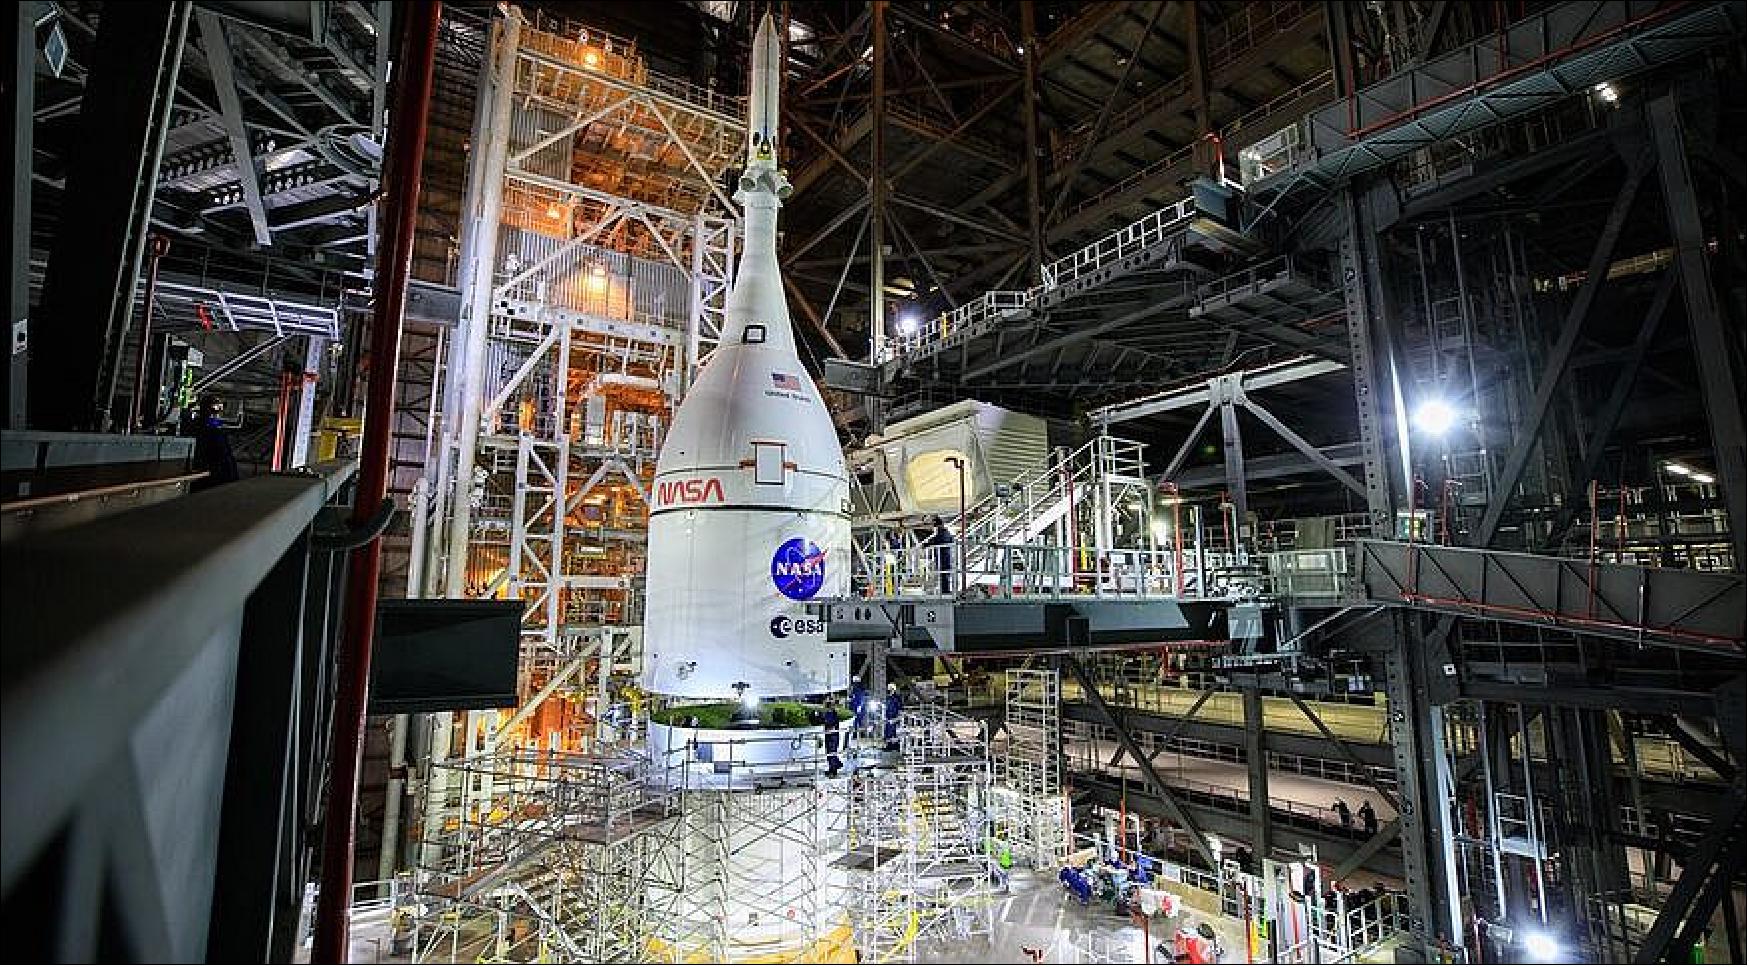 Figure 6: The Orion spacecraft is installed on top of the Space Launch System rocket inside the Vehicle Assembly Building at the Kennedy Space Center Oct. 20, completing the assembly of the vehicle for the Artemis 1 mission now scheduled for no earlier than February 2022 (image credit: NASA, Frank Michaux)